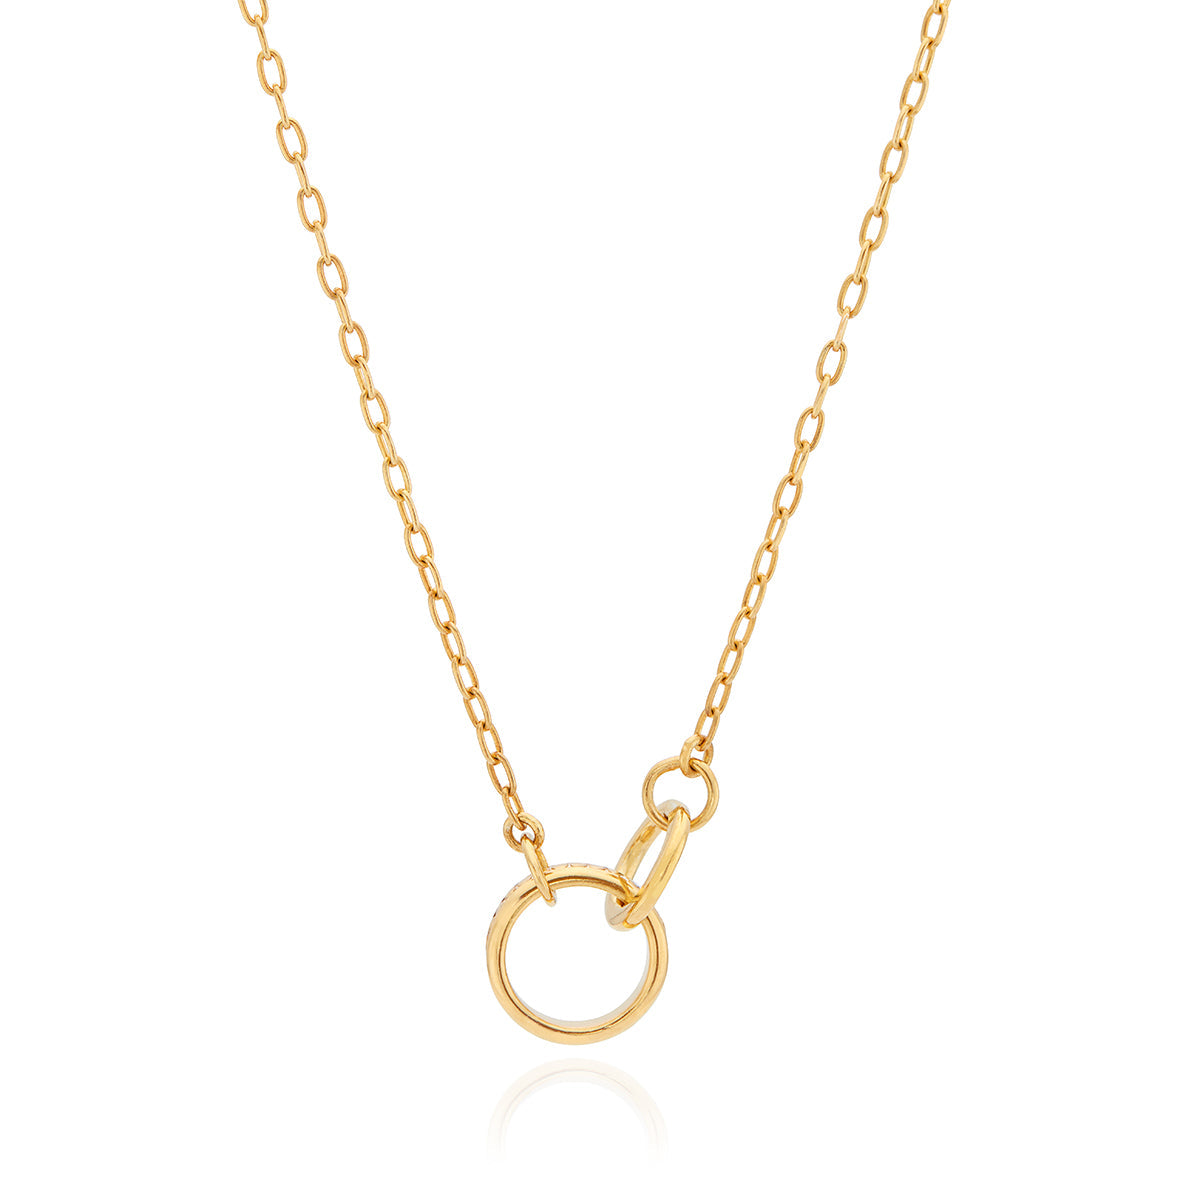 Anna Beck - Intertwined Circles Charity Necklace - Gold